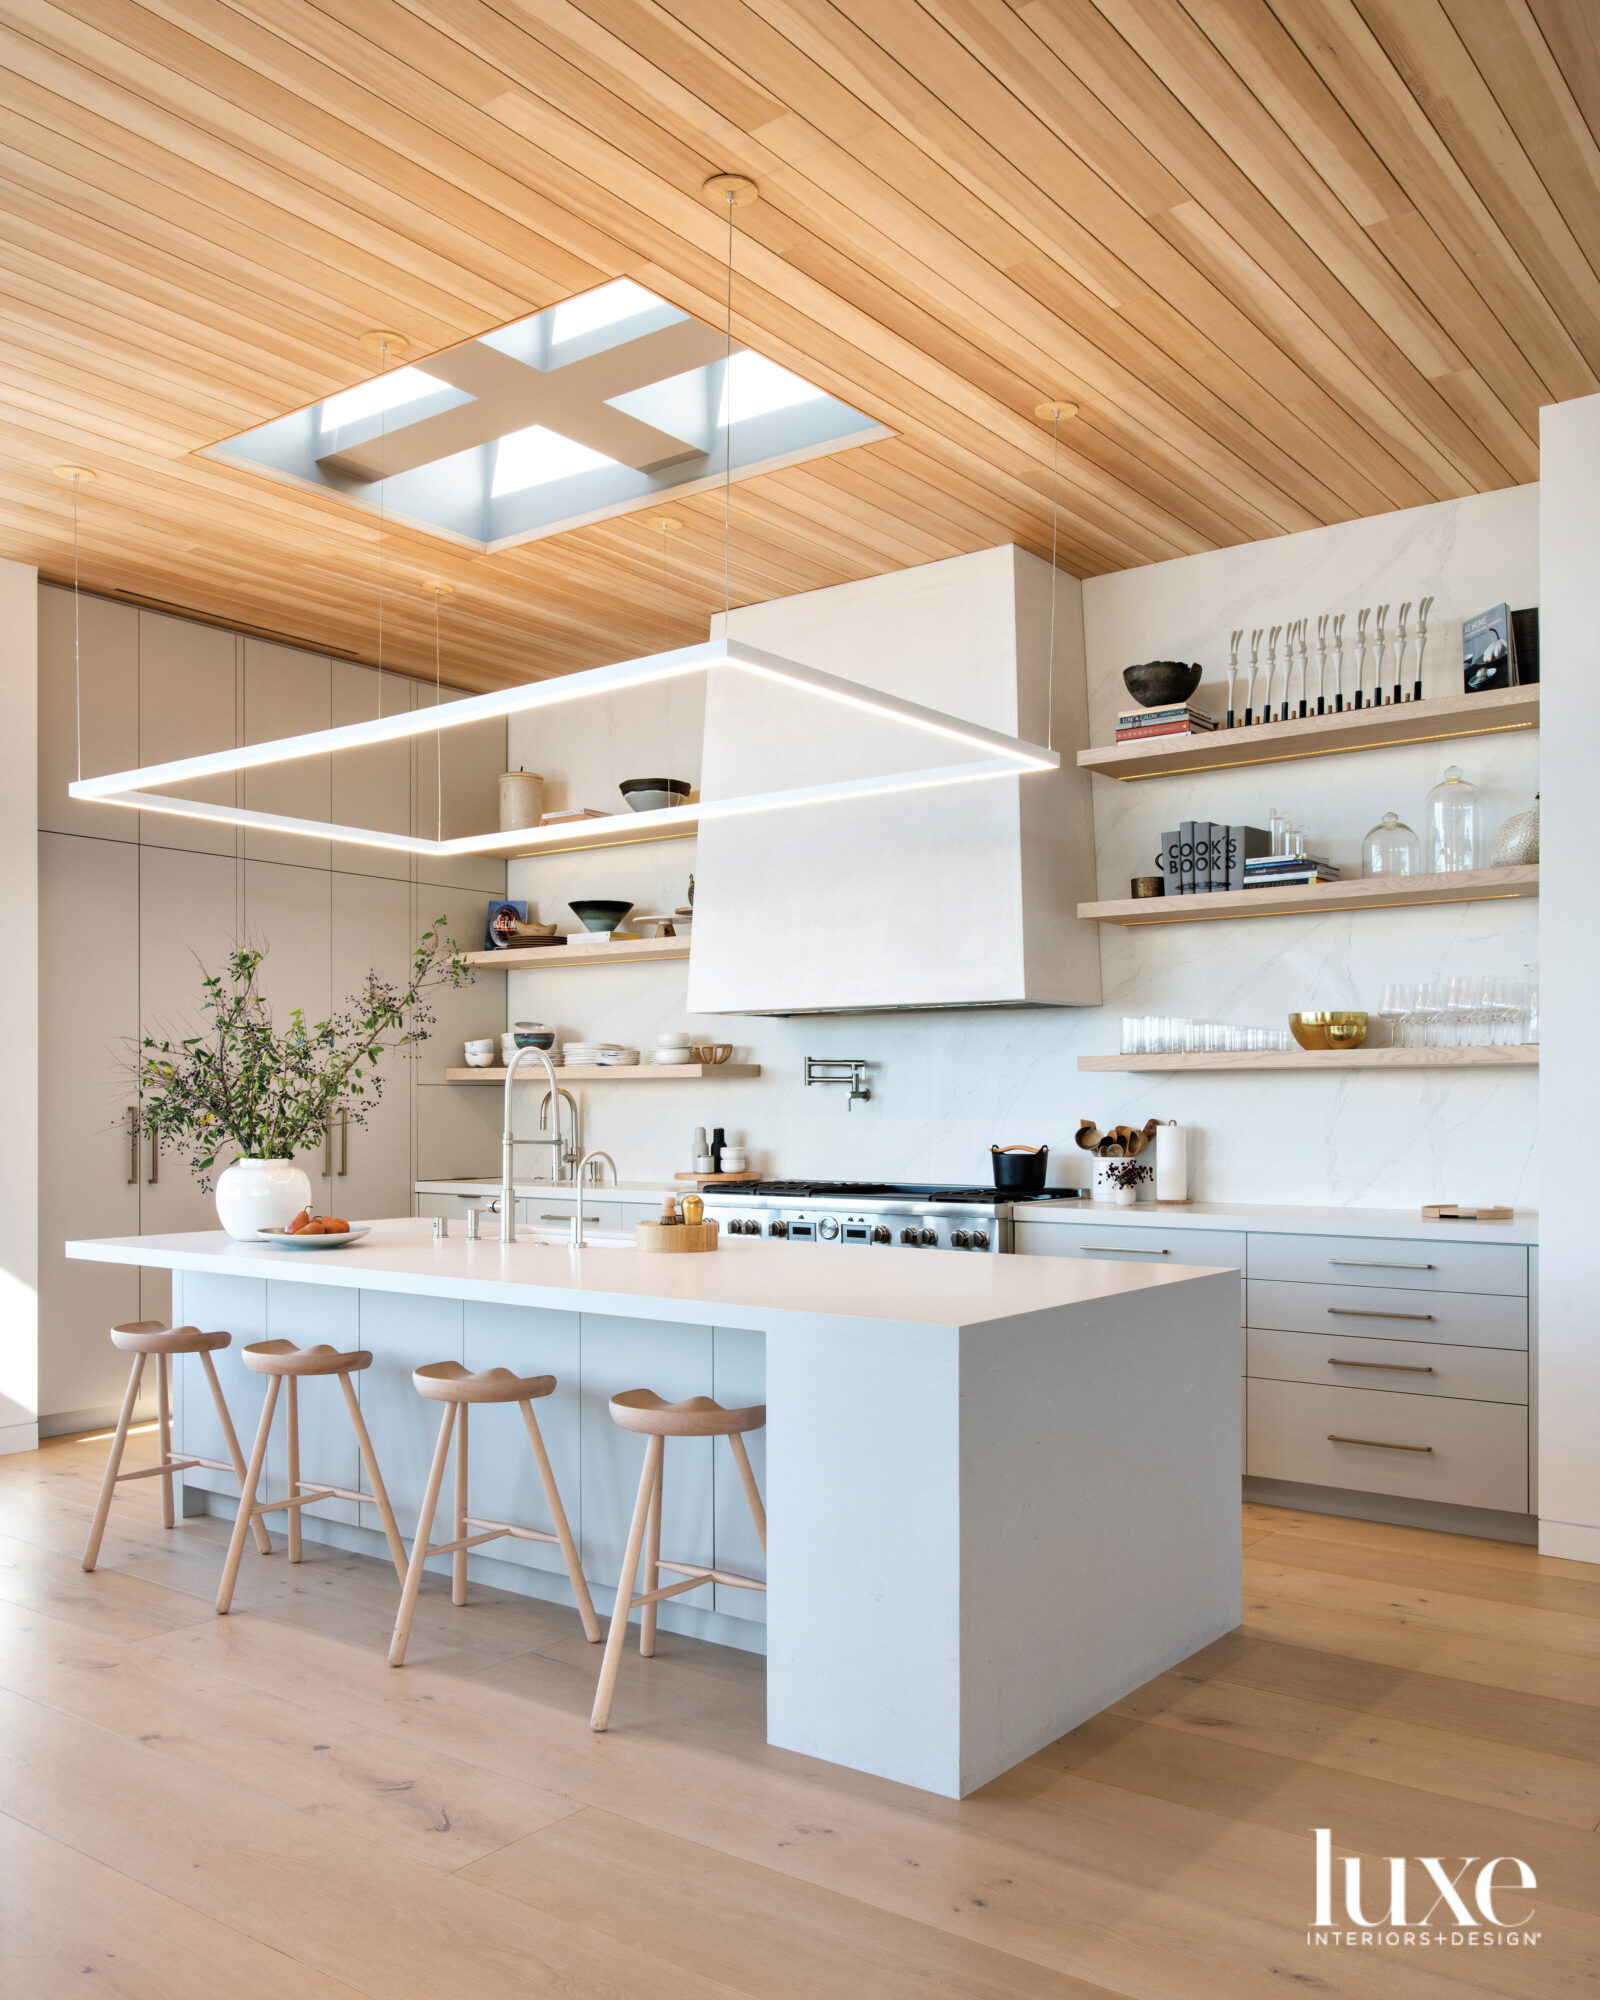 Kitchen with skylight above